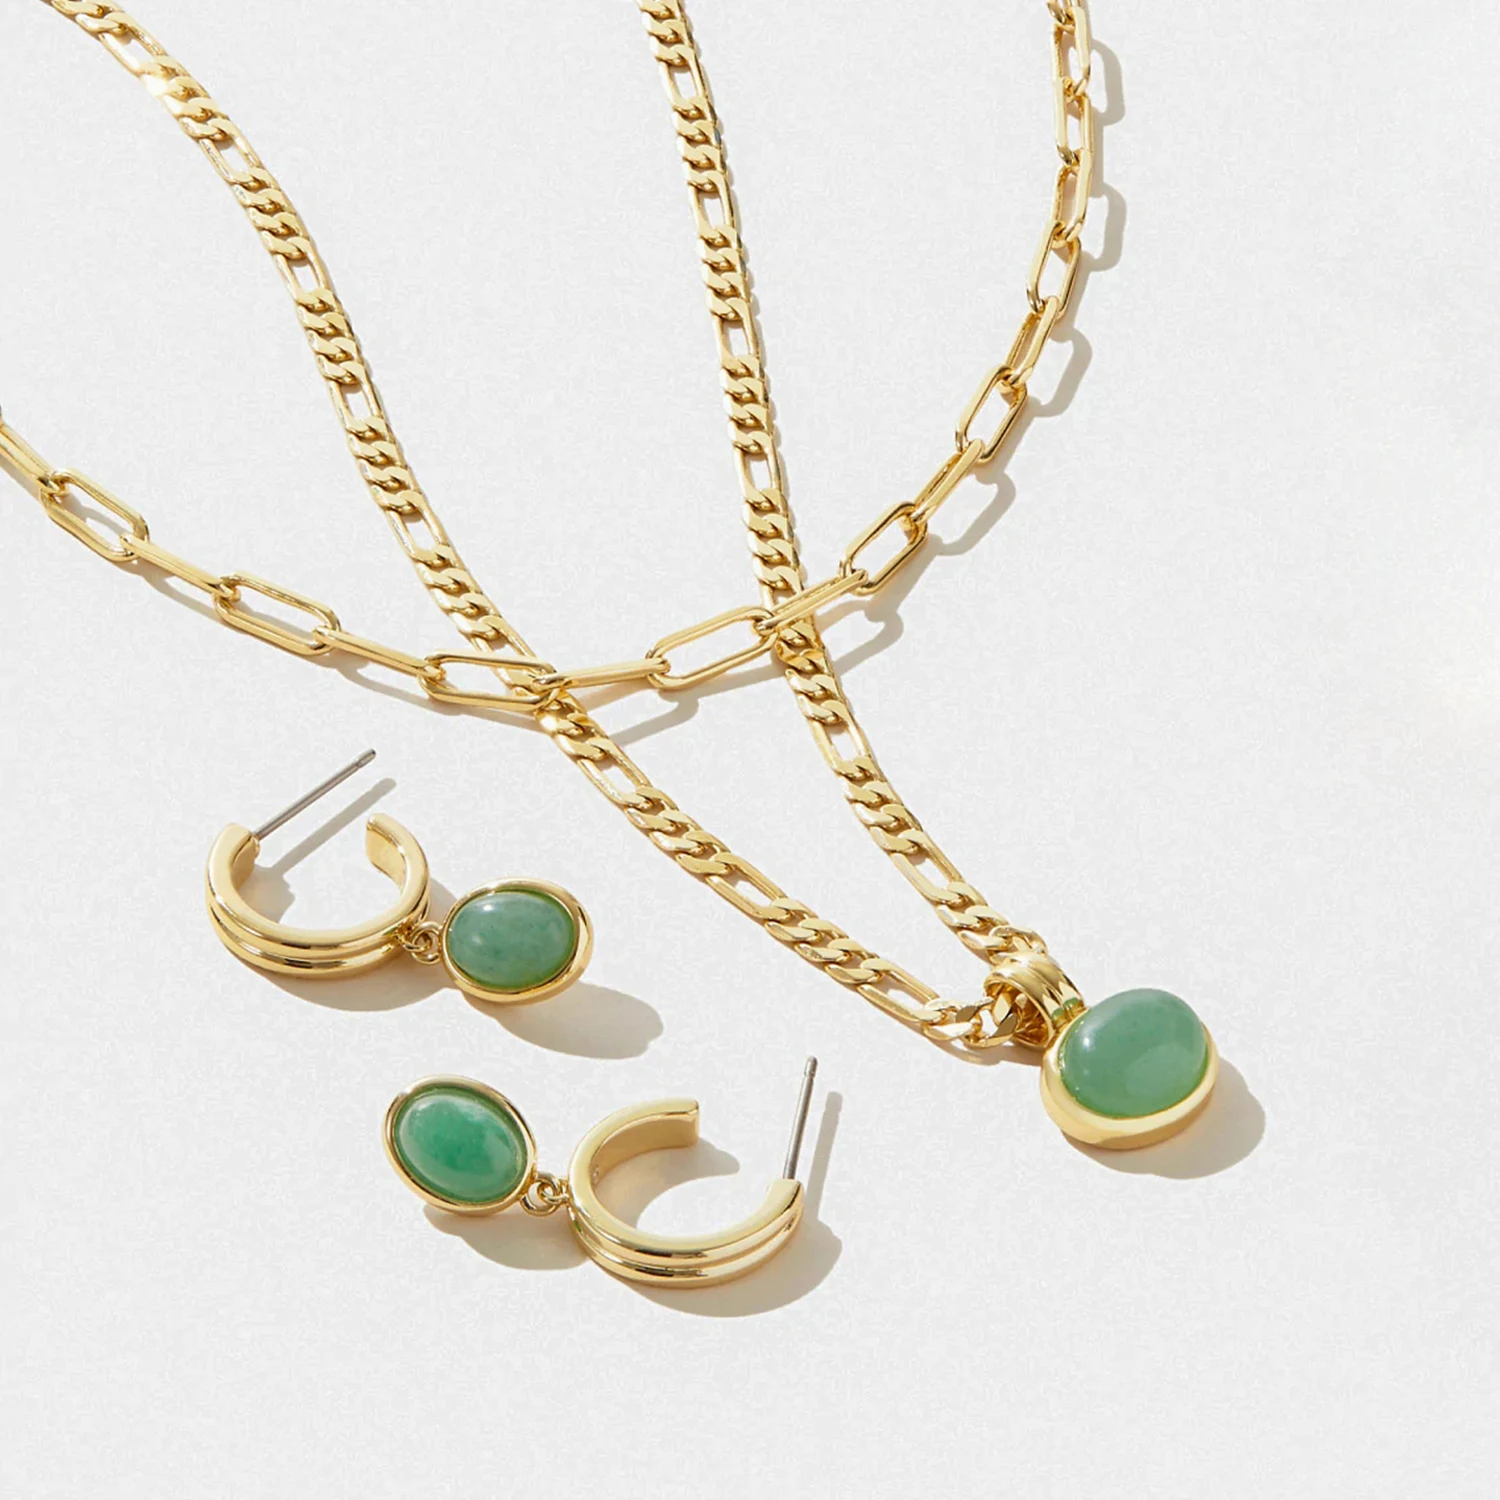 

Natual Stone Stainless Steel Jewelry Sets 18k Gold Figaro Chain PVD Plating CC Hoop Earrings Green Agate Pendant Necklace Women